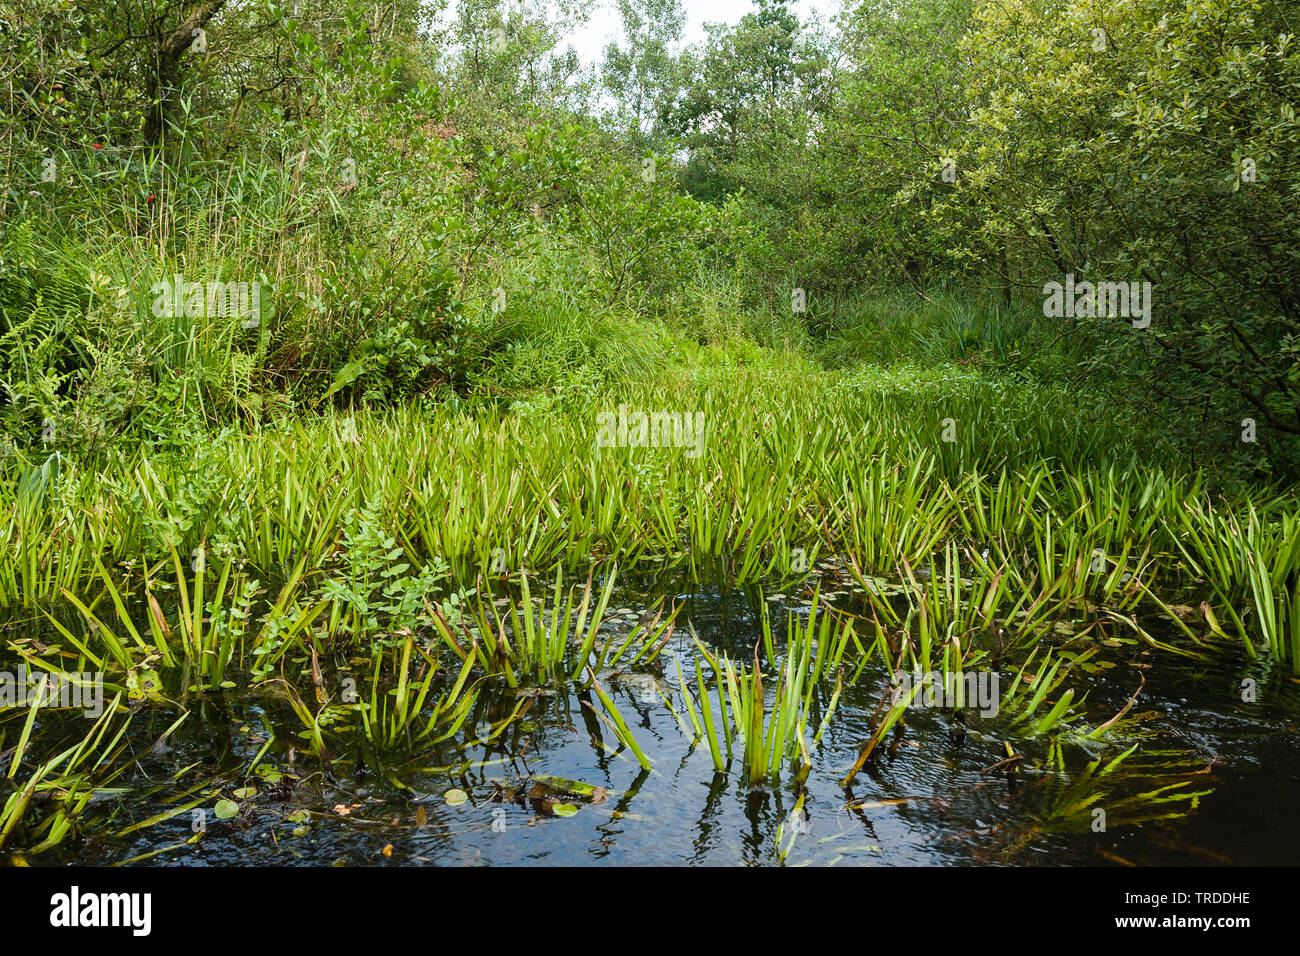 crab's-claw, water-soldier (Stratiotes aloides), in a pond in the National park, Netherlands, Overijssel, Weerribben-Wieden National Park Stock Photo